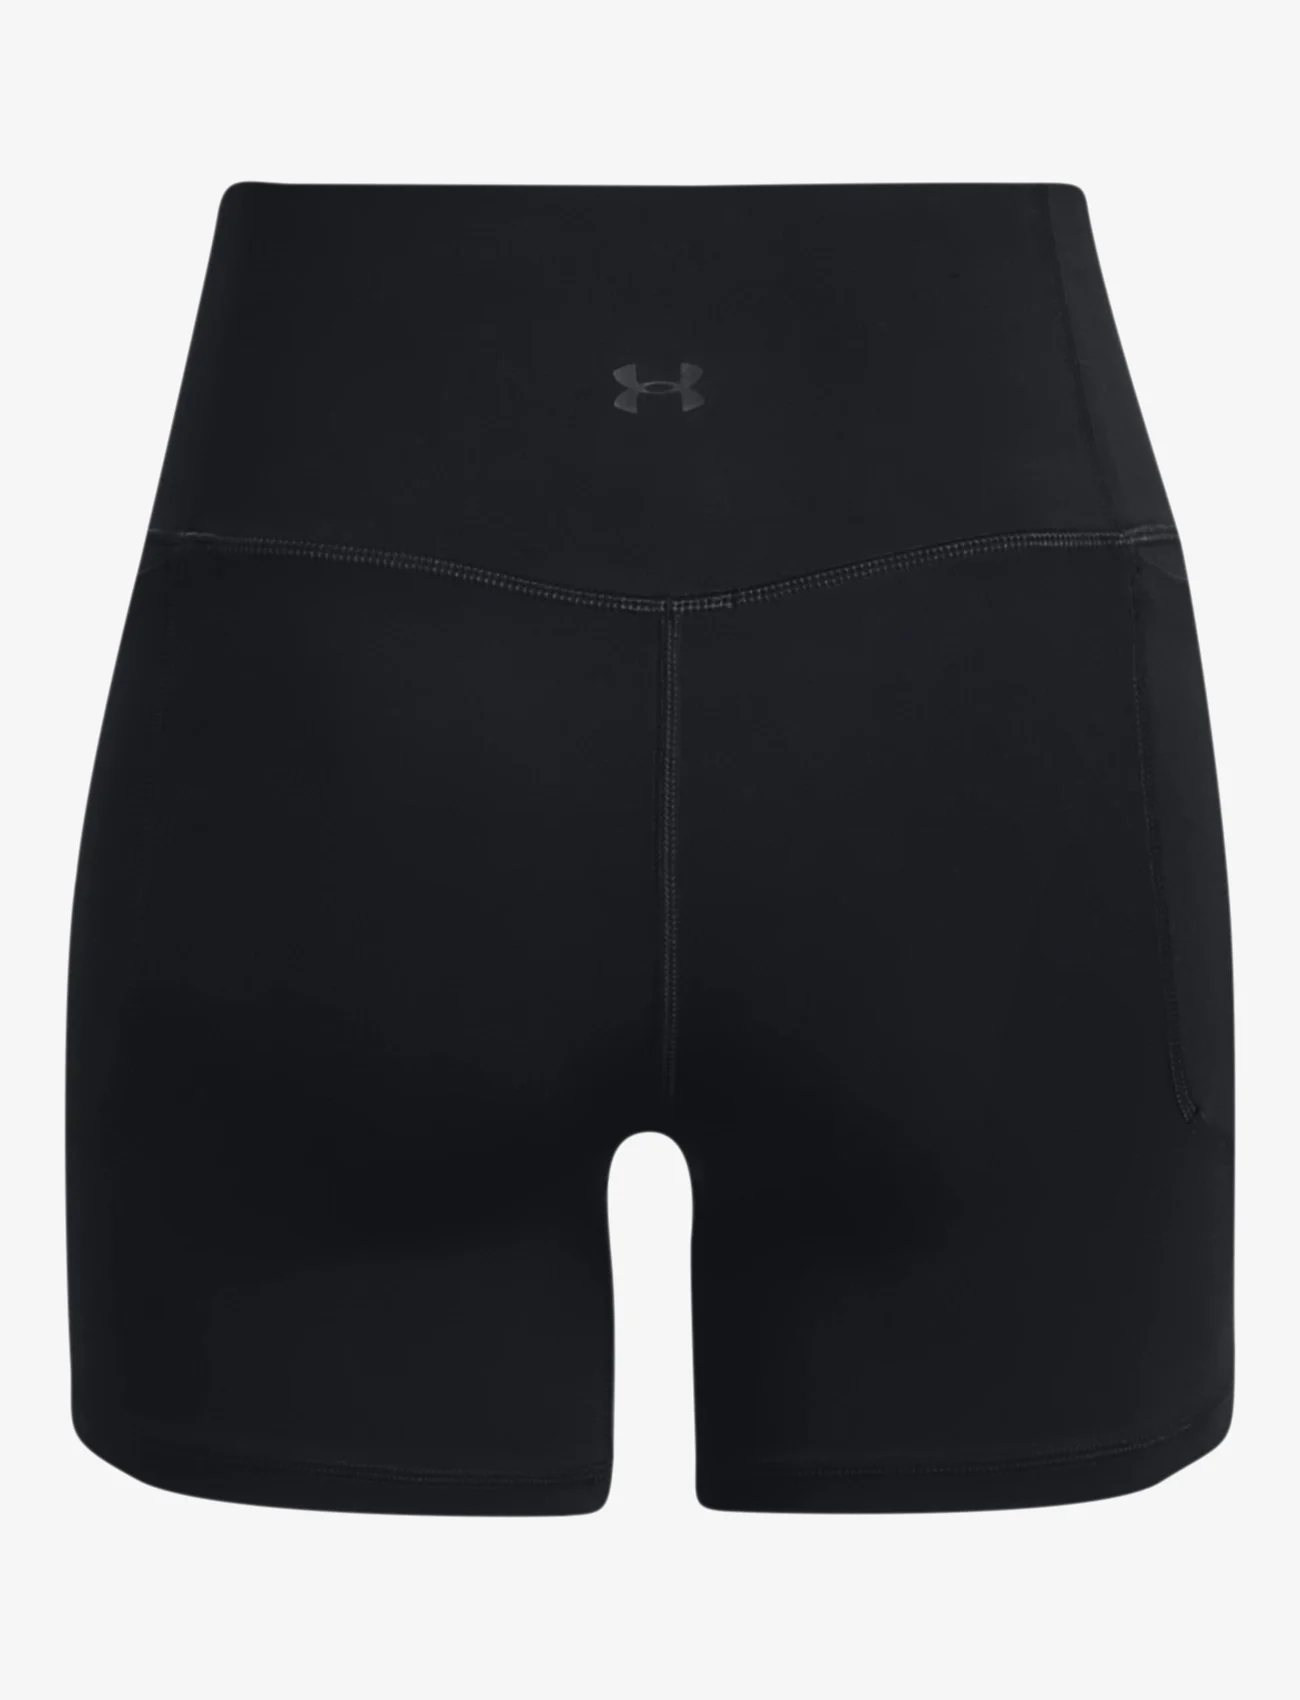 Under Armour - Meridian Middy - trening shorts - black - 1